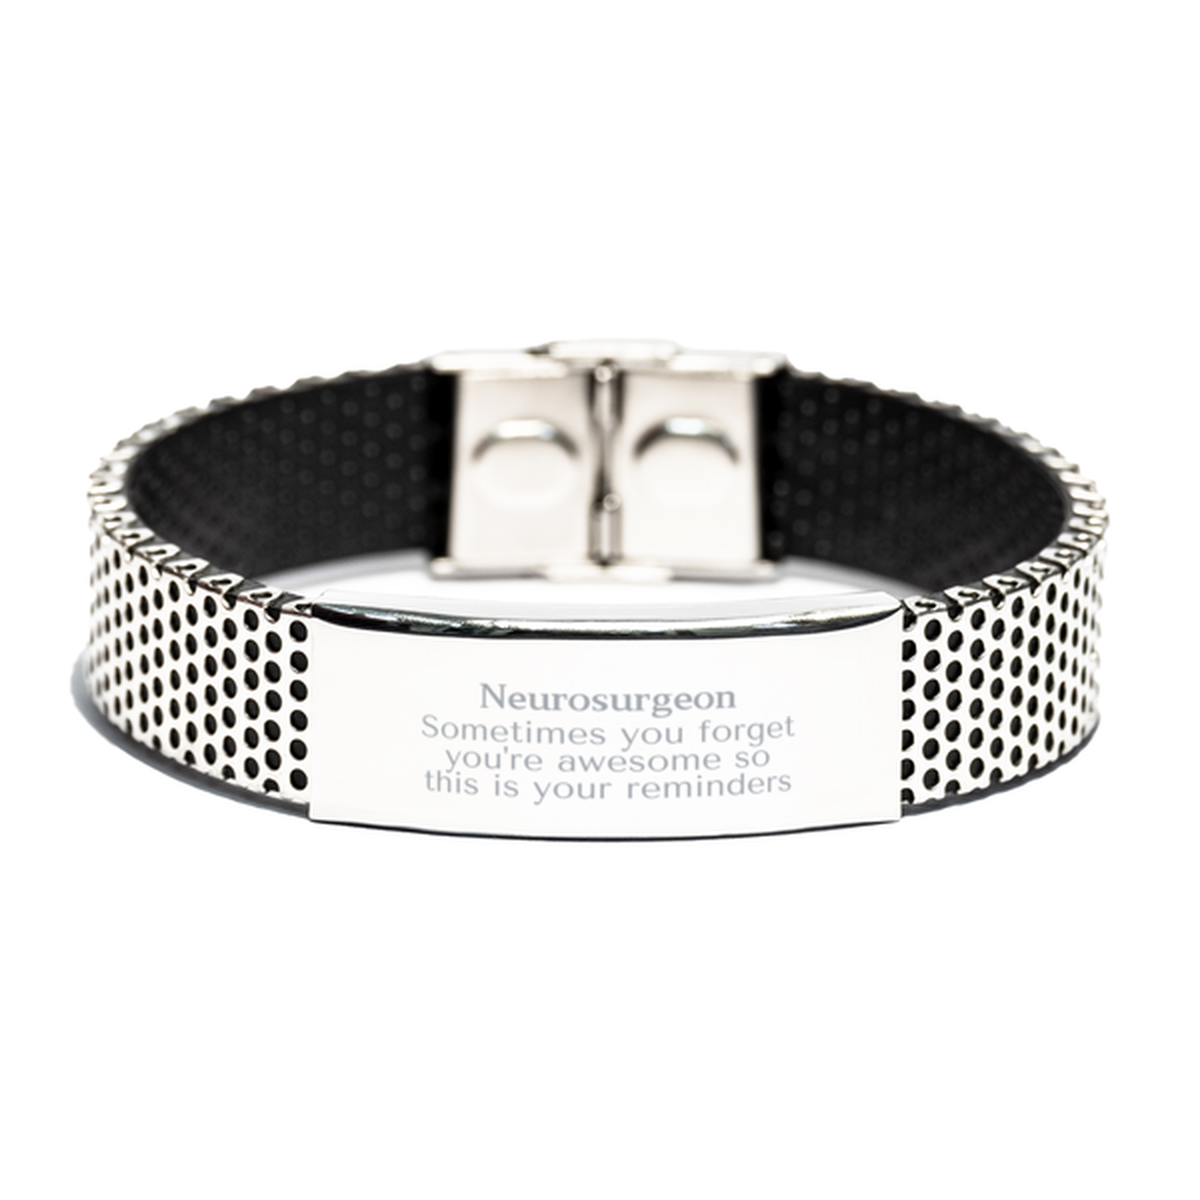 Sentimental Neurosurgeon Stainless Steel Bracelet, Neurosurgeon Sometimes you forget you're awesome so this is your reminders, Graduation Christmas Birthday Gifts for Neurosurgeon, Men, Women, Coworkers